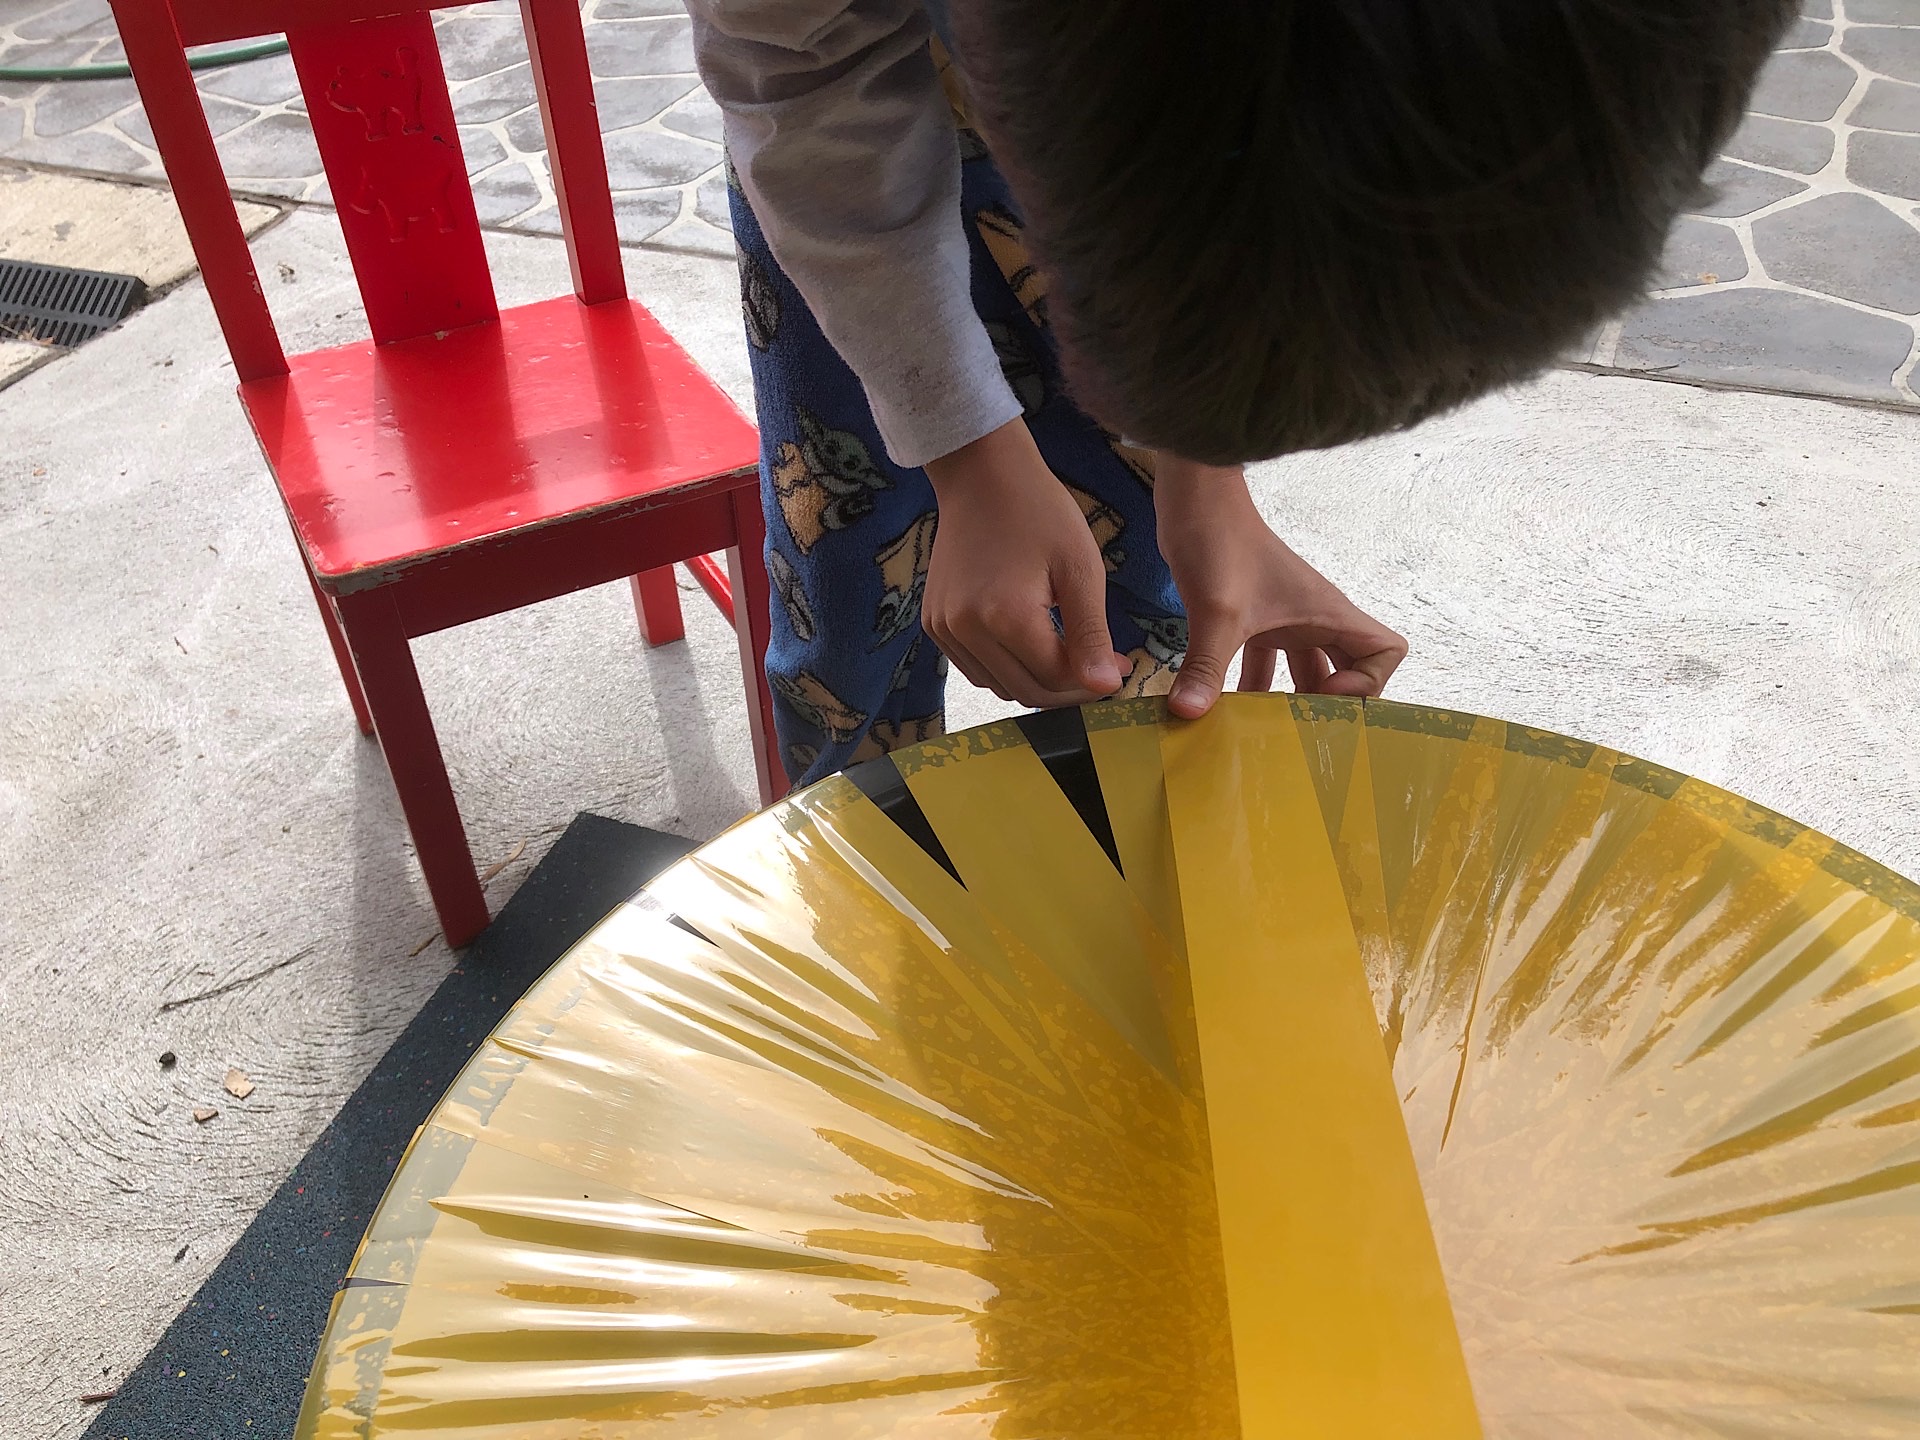 Making a drum with packing tape